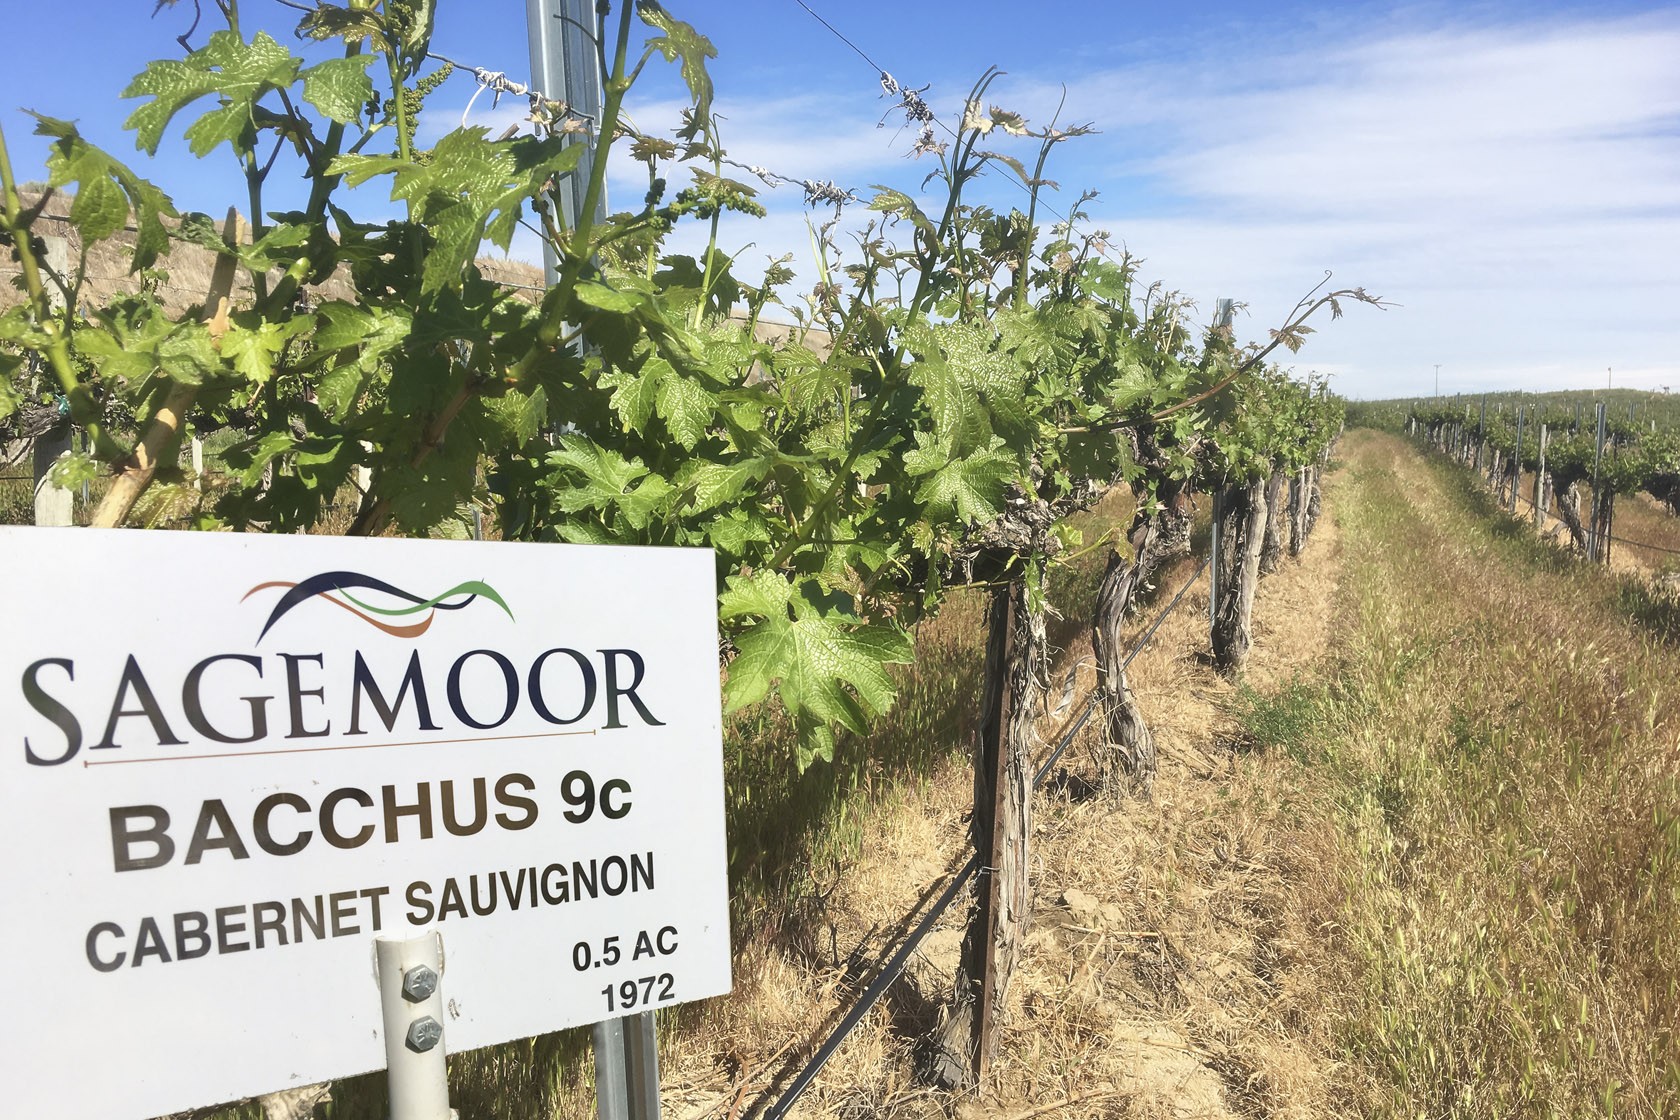 A Brief History of Washington Wine. Image of Bacchus Vineyard, planted in 1972.